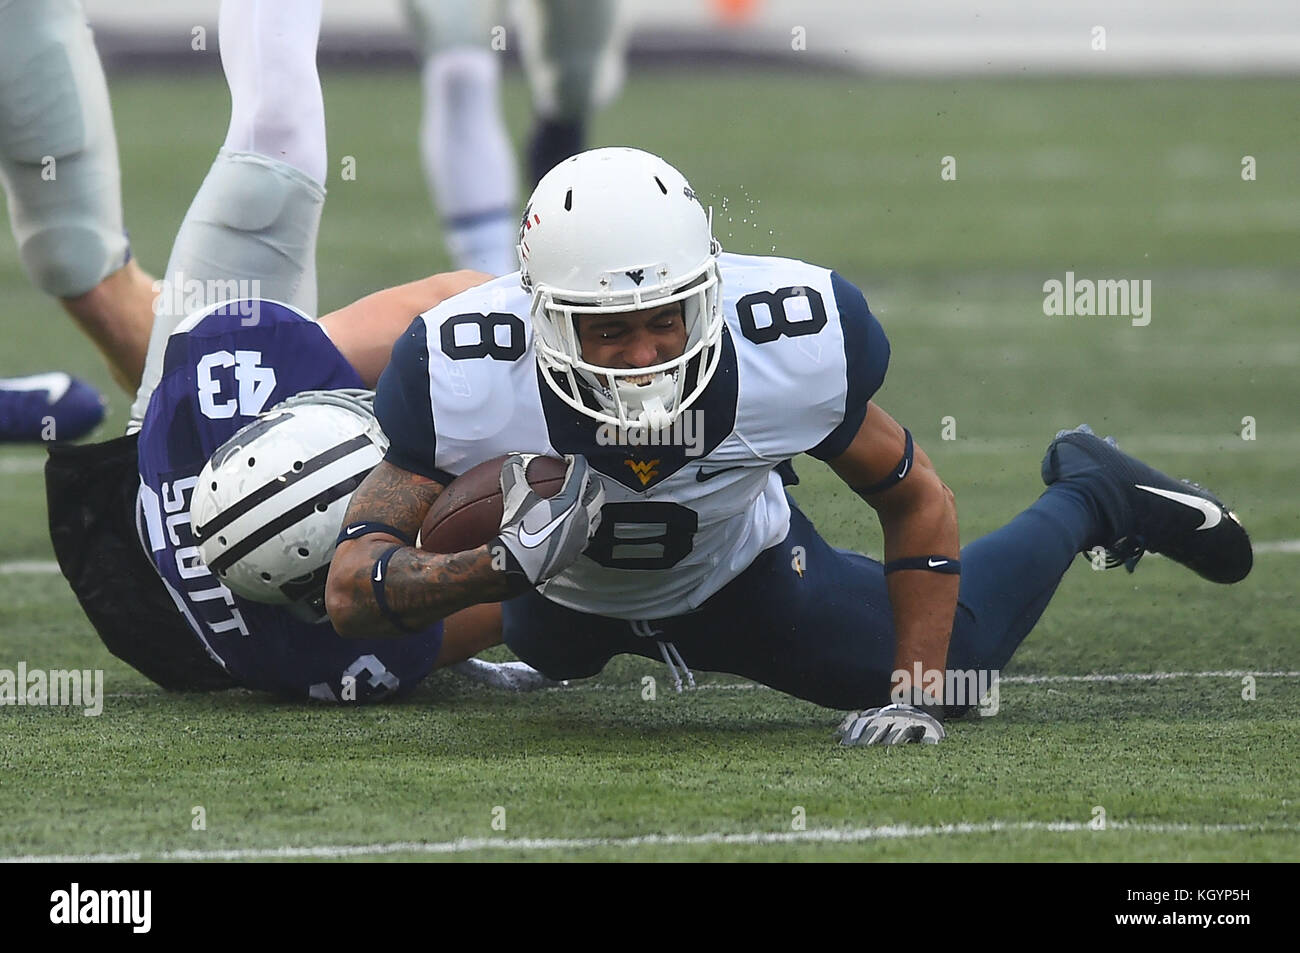 Manhattan, Kansas, USA. 11th Nov, 2017. West Virginia Mountaineers wide receiver Marcus Simms (8) is tackled after a reception in the first halfduring the NCAA Football Game between the West Virginia Mountaineers and the Kansas State Wildcats at Bill Snyder Family Stadium in Manhattan, Kansas. Kendall Shaw/CSM/Alamy Live News Stock Photo